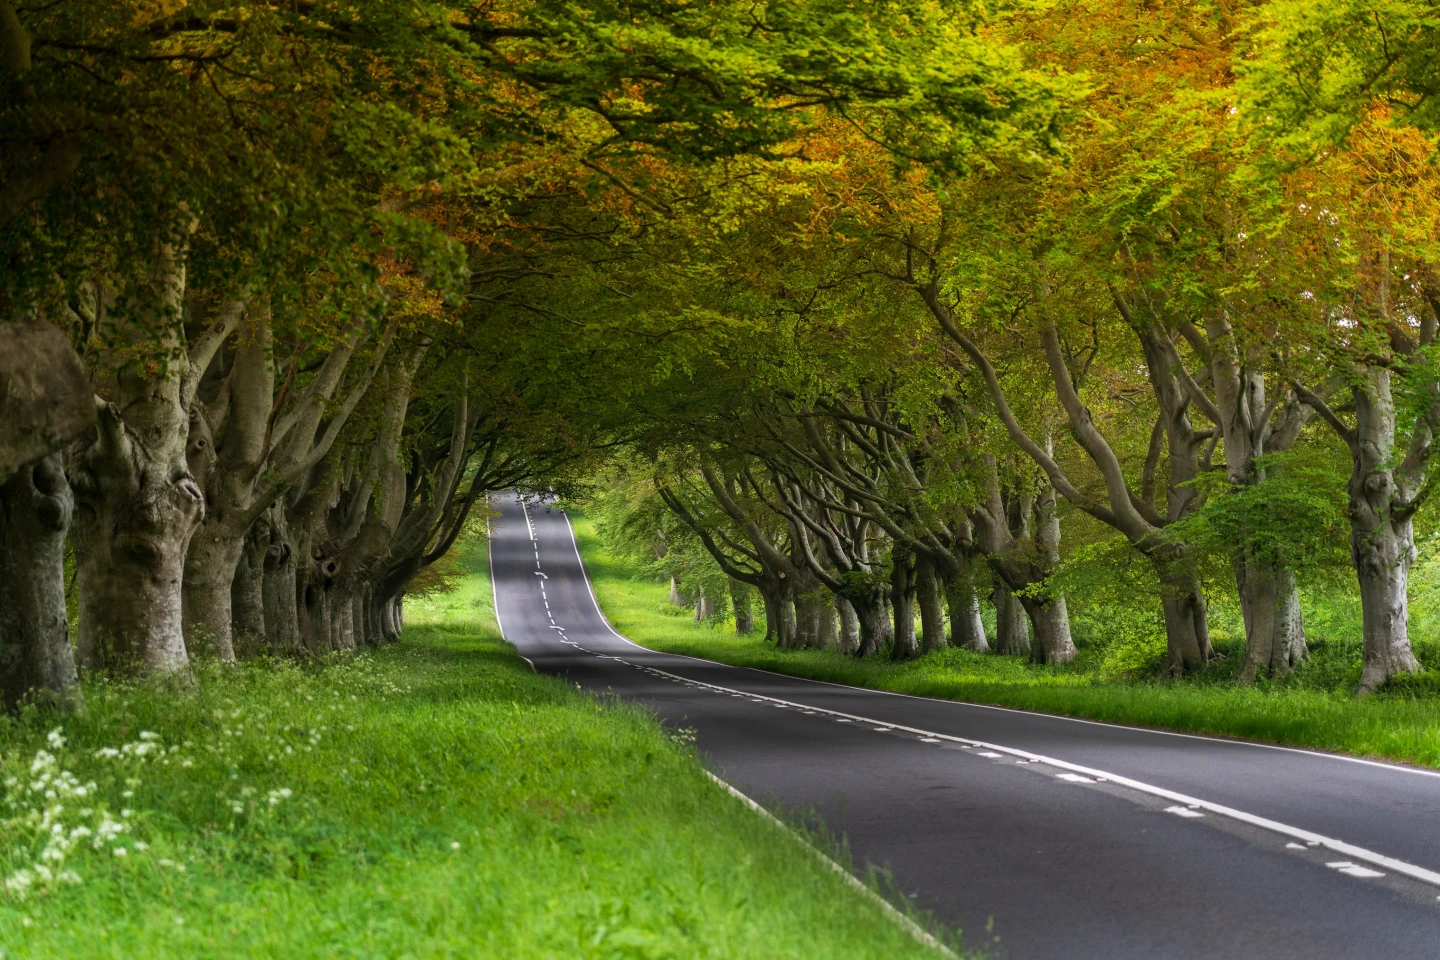 A picturesque paved straight road, cutting through a beautiful green and yellow forest of trees.